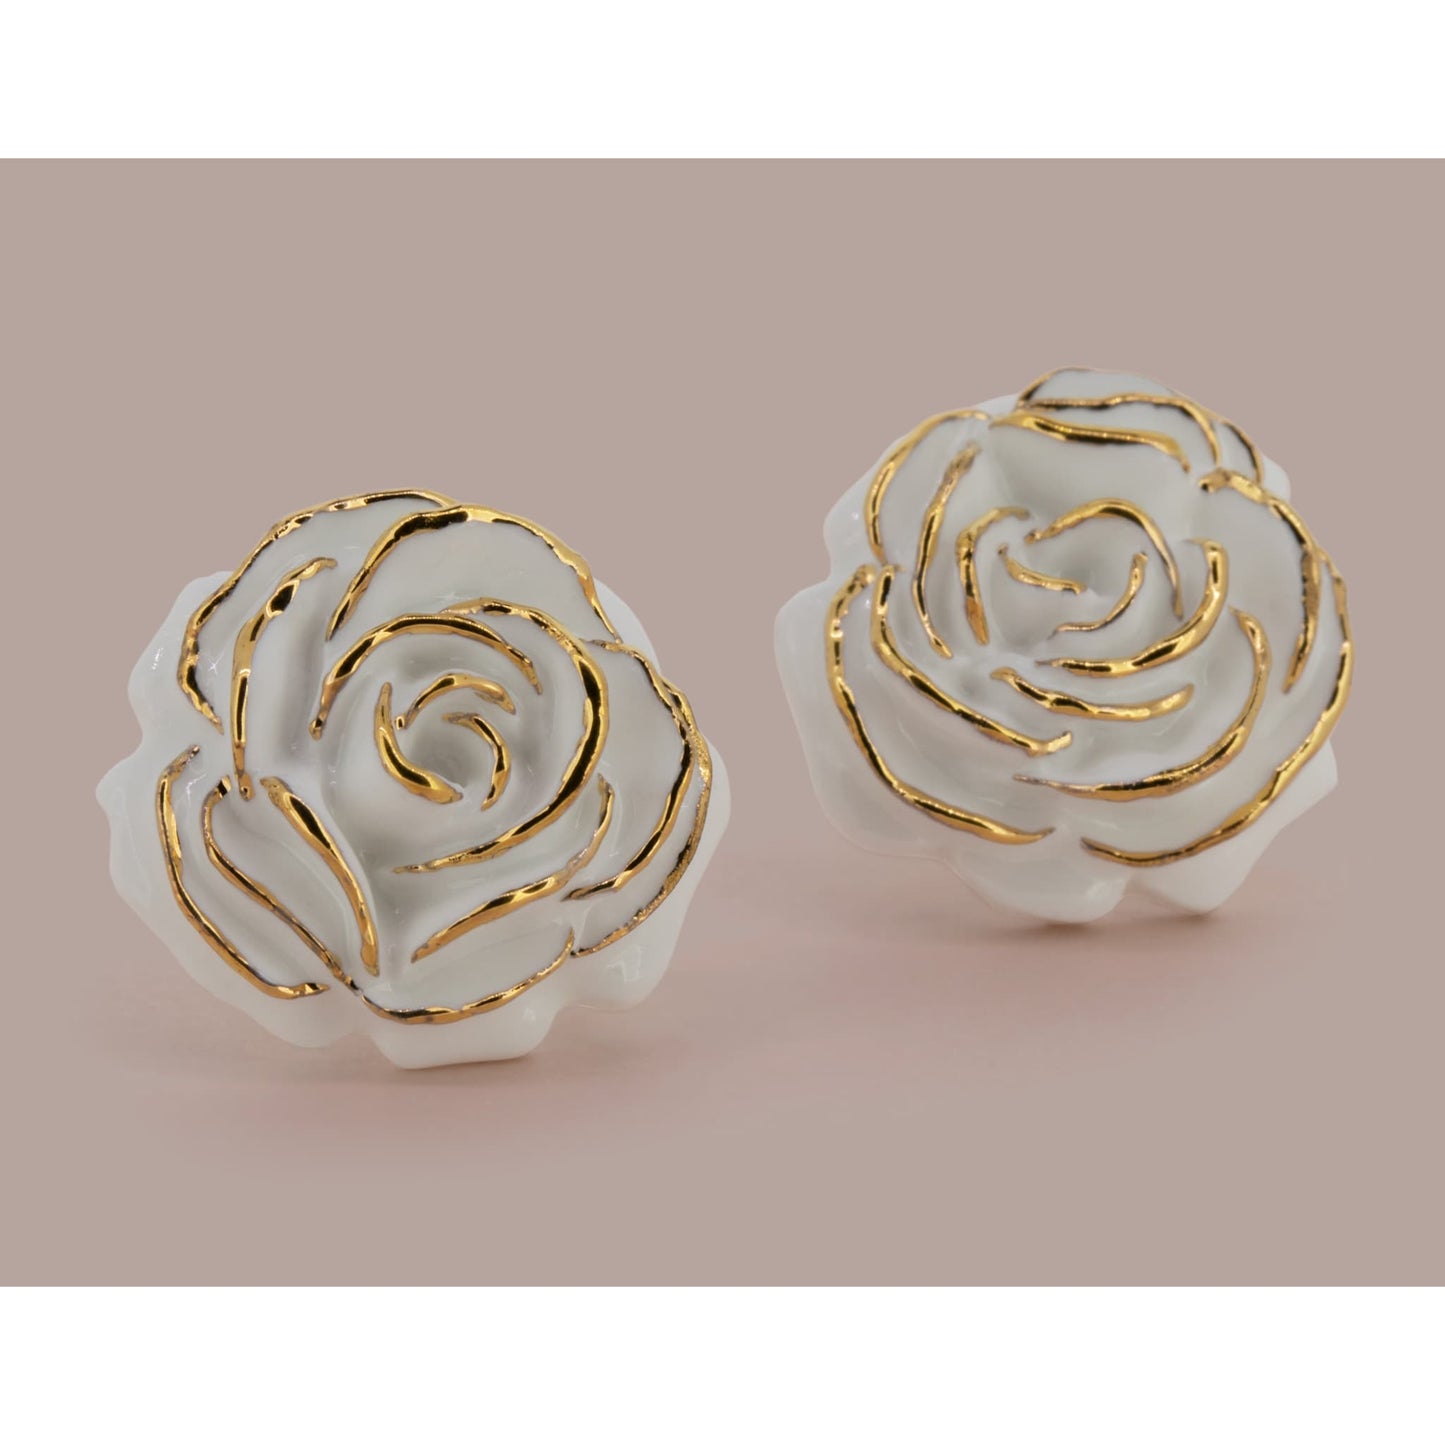 Big Rose Stud Earrings Made Of Porcelain In Pink Background